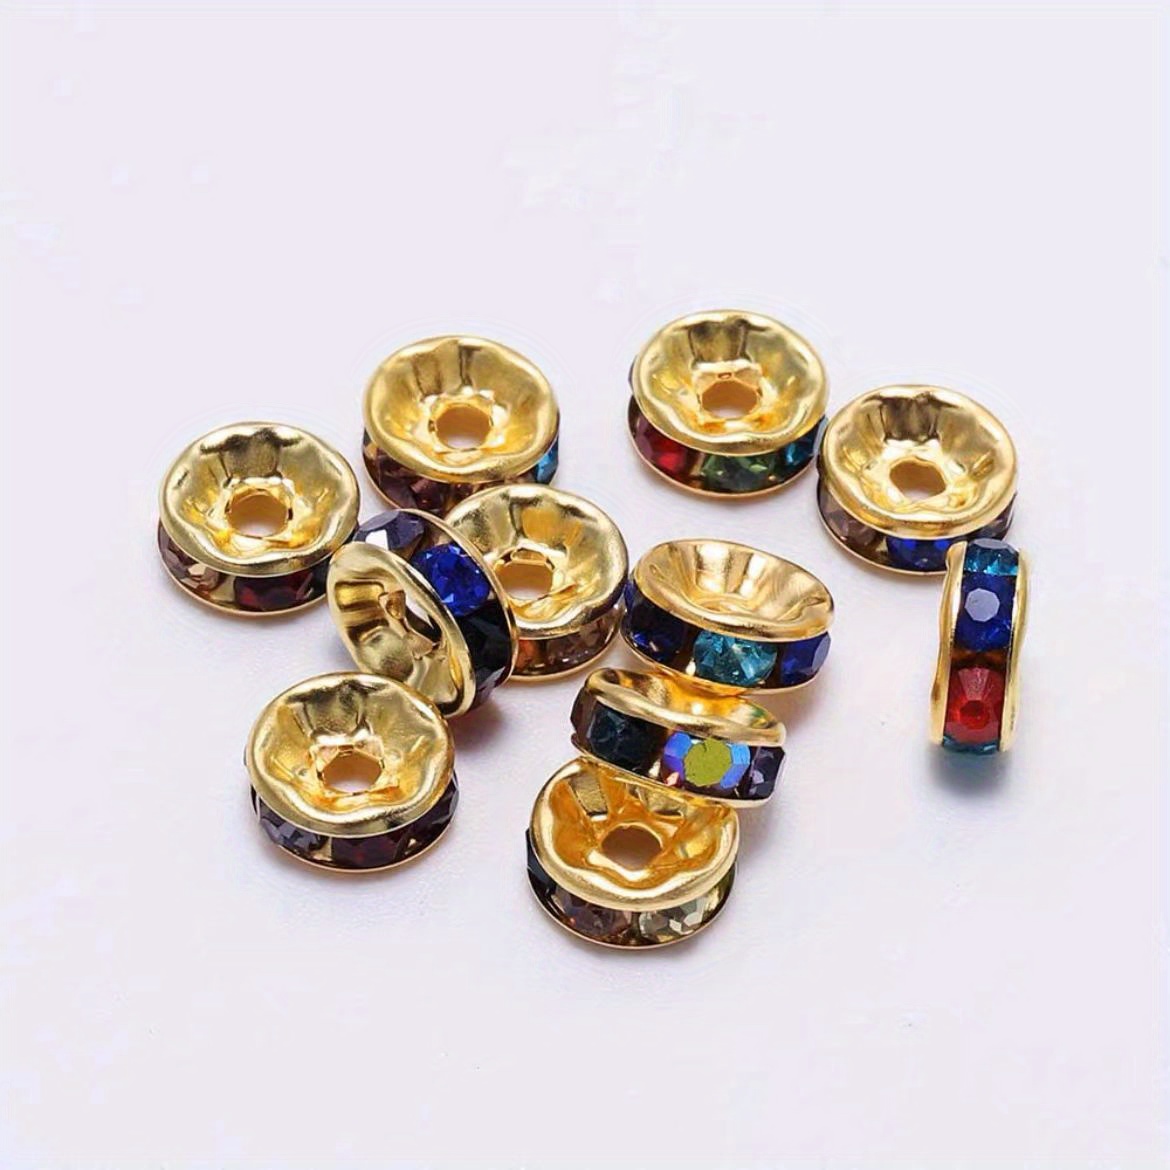 6mm Gold Rhinestone Rondelles Crystal Bead Loose Spacer Beads for